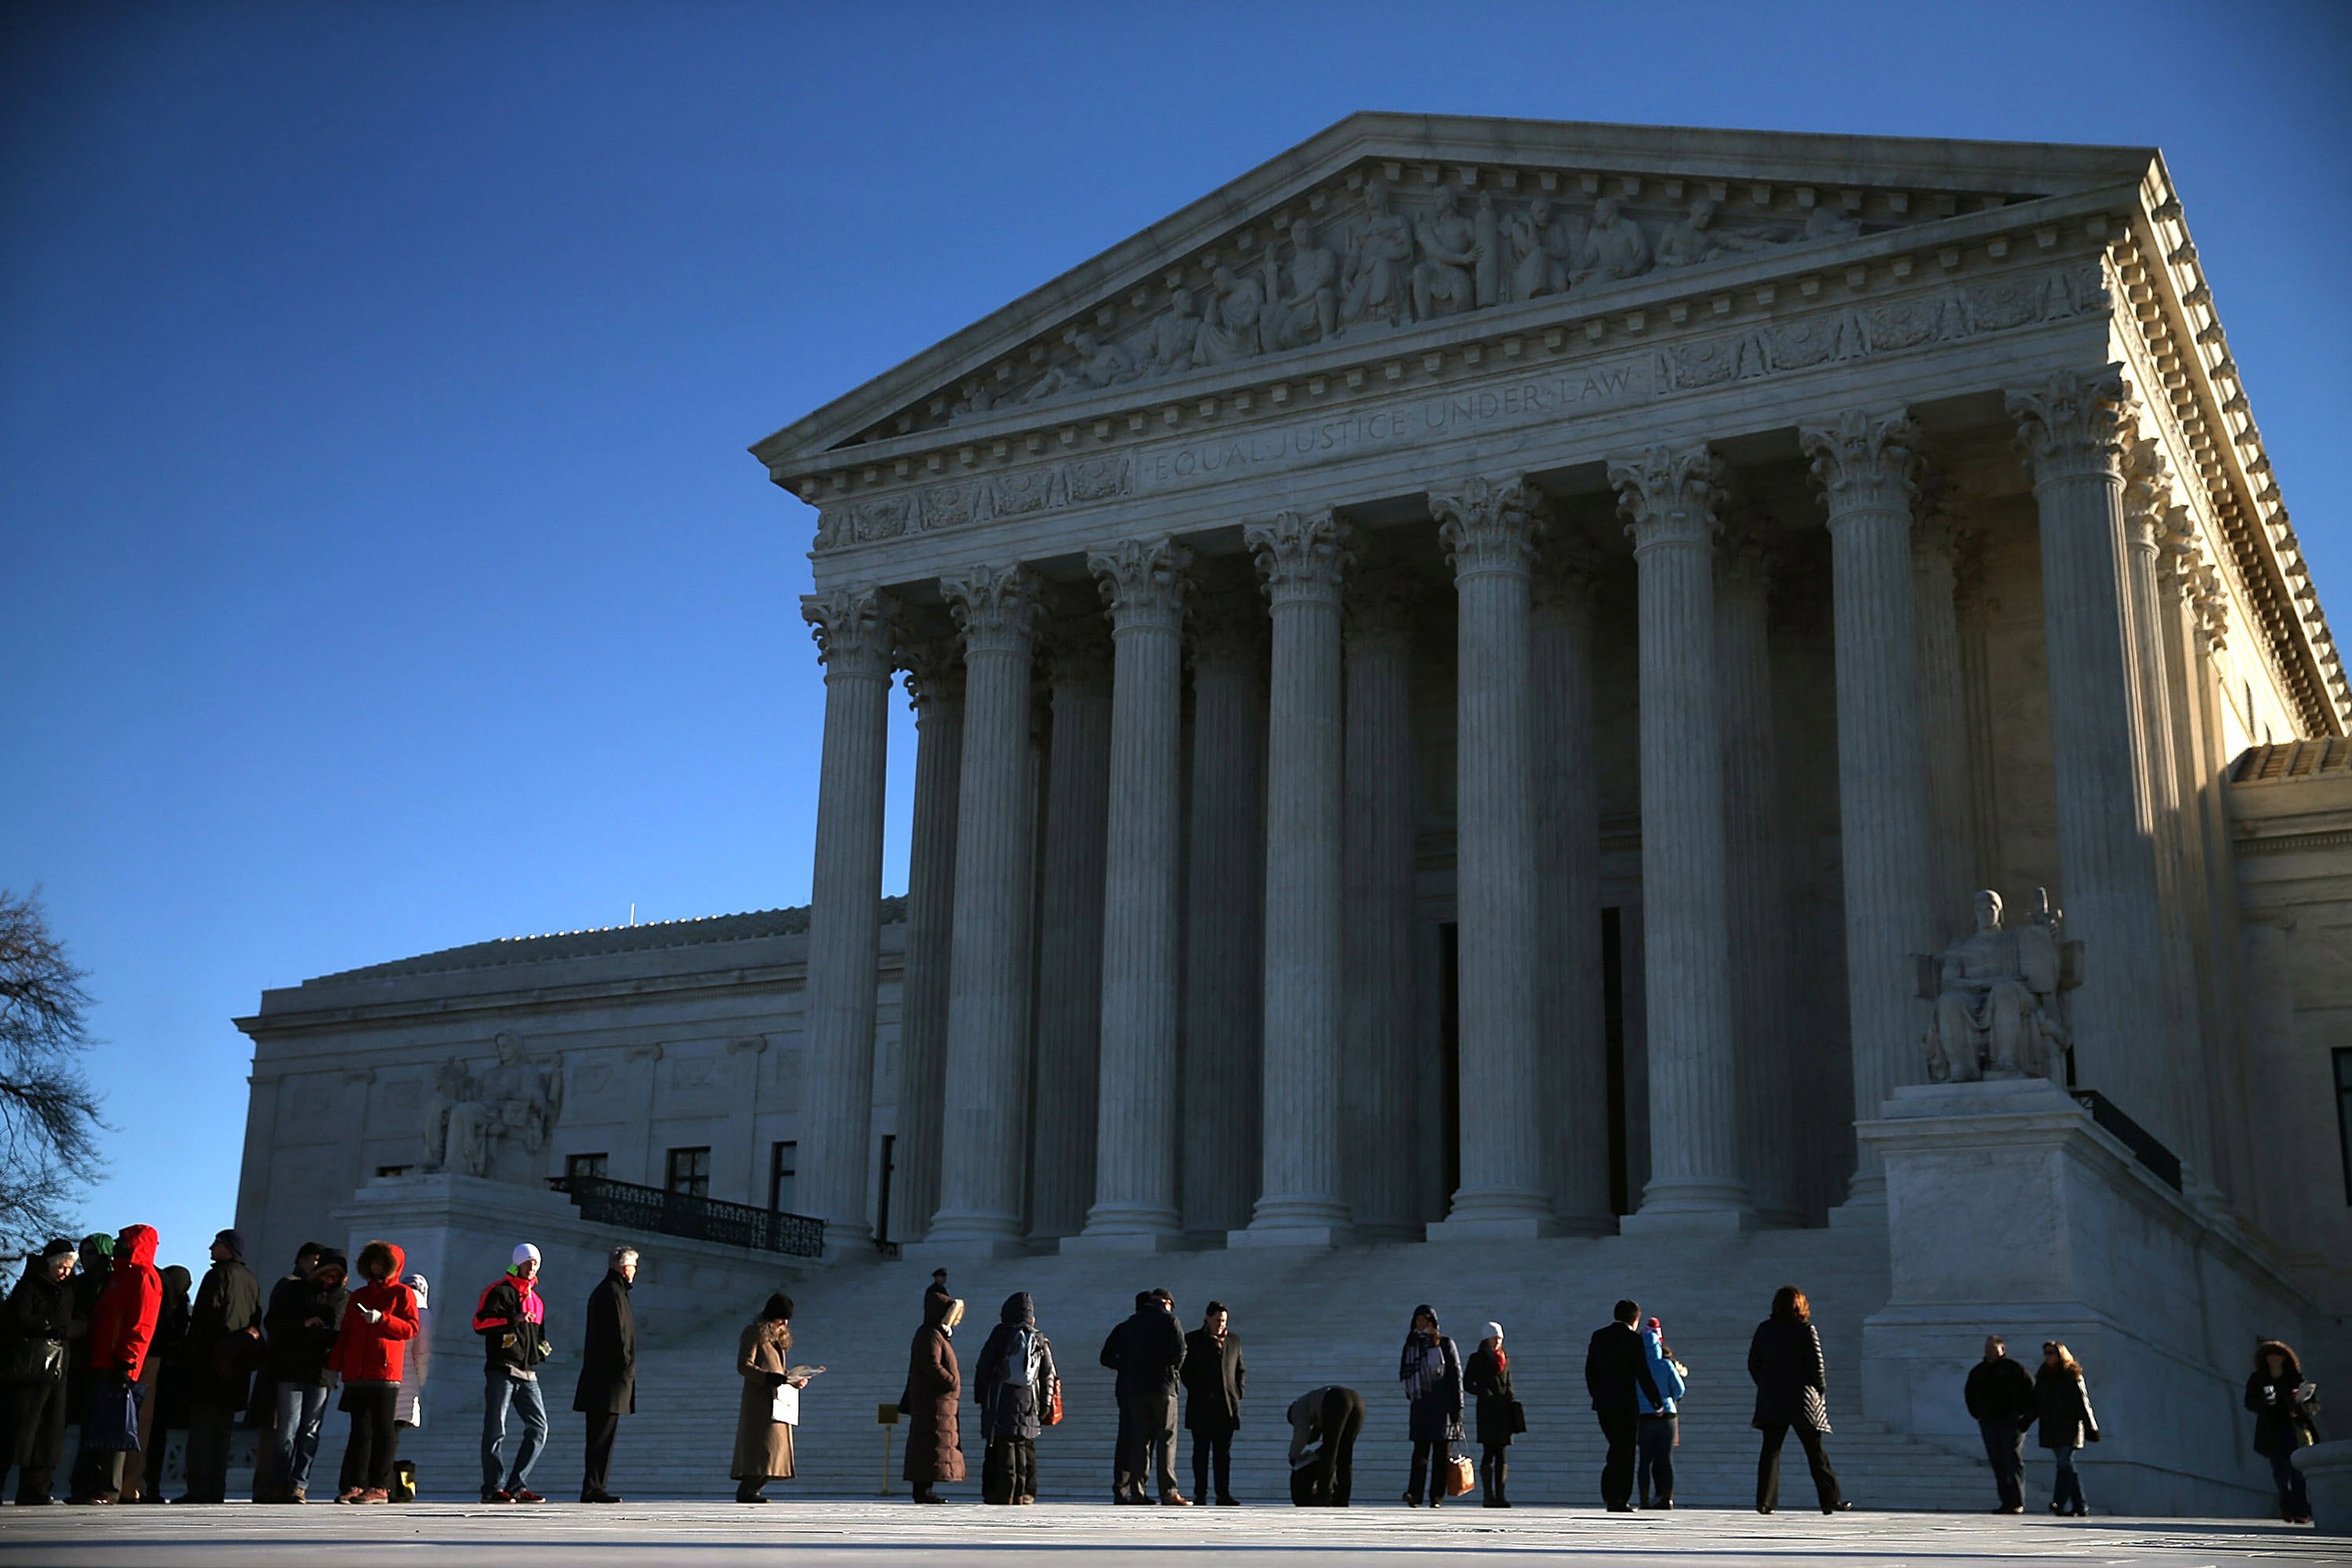 People wait in line to enter the US Supreme Court building in Washington on Jan. 11, 2016. (Mark Wilson—Getty Images)